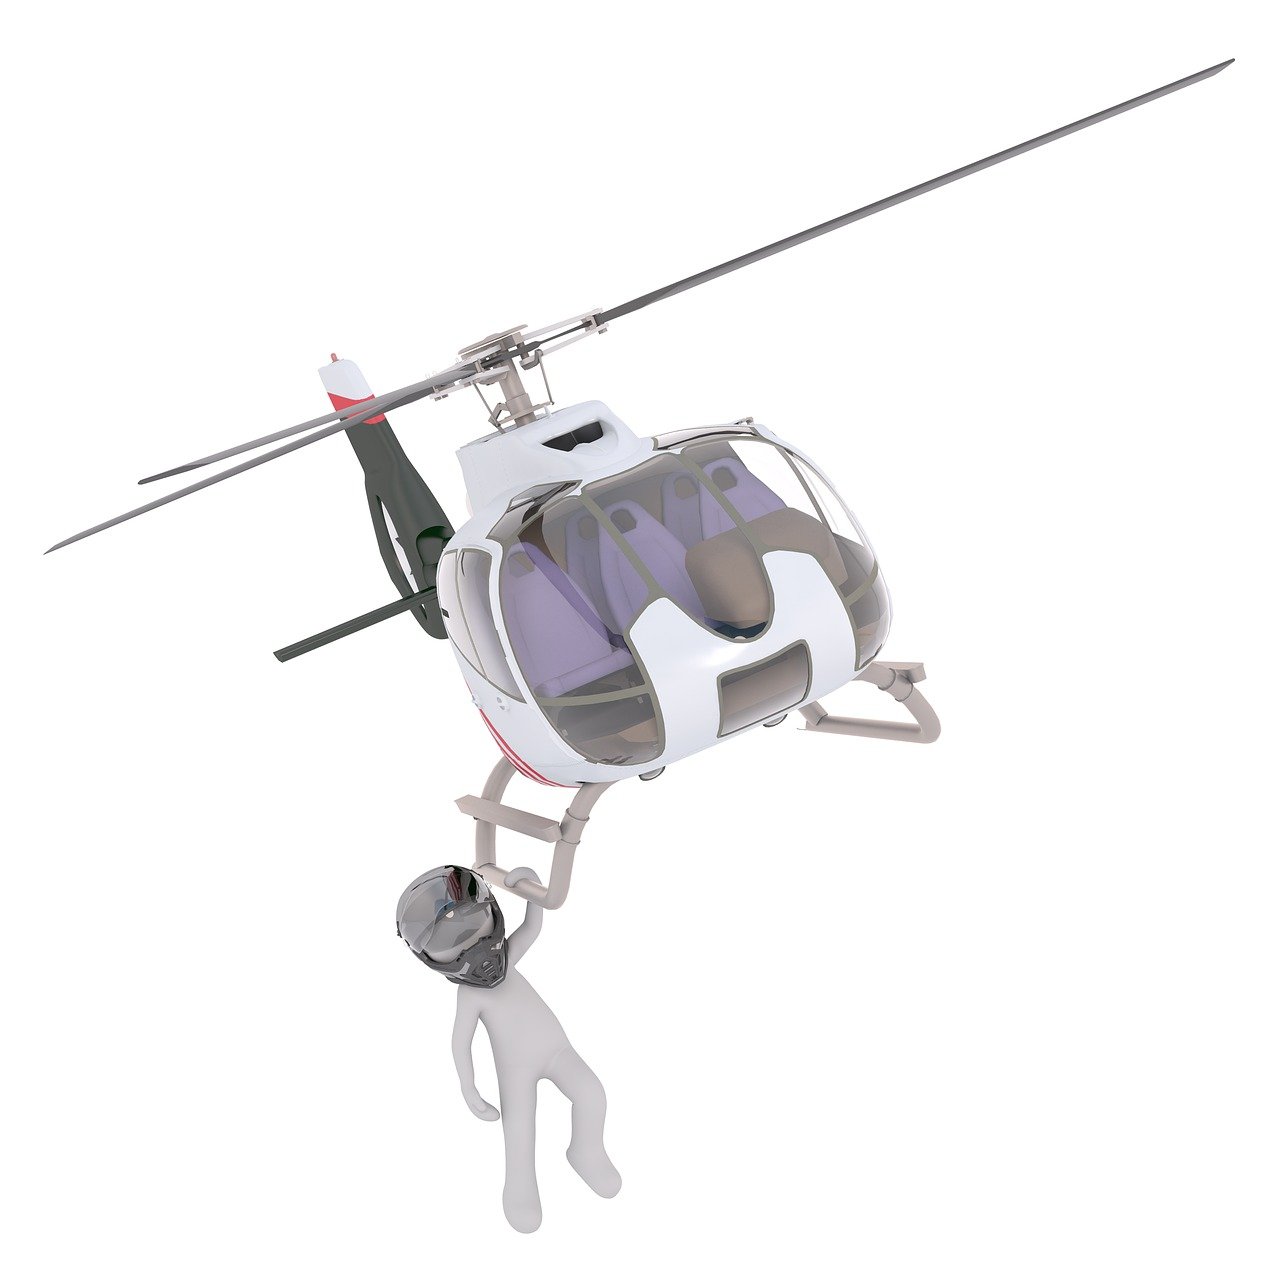 a man hanging from the side of a helicopter, concept art, conceptual art, orthographic 3d rendering, full lenght view. white plastic, with wires and bandages, top down photo